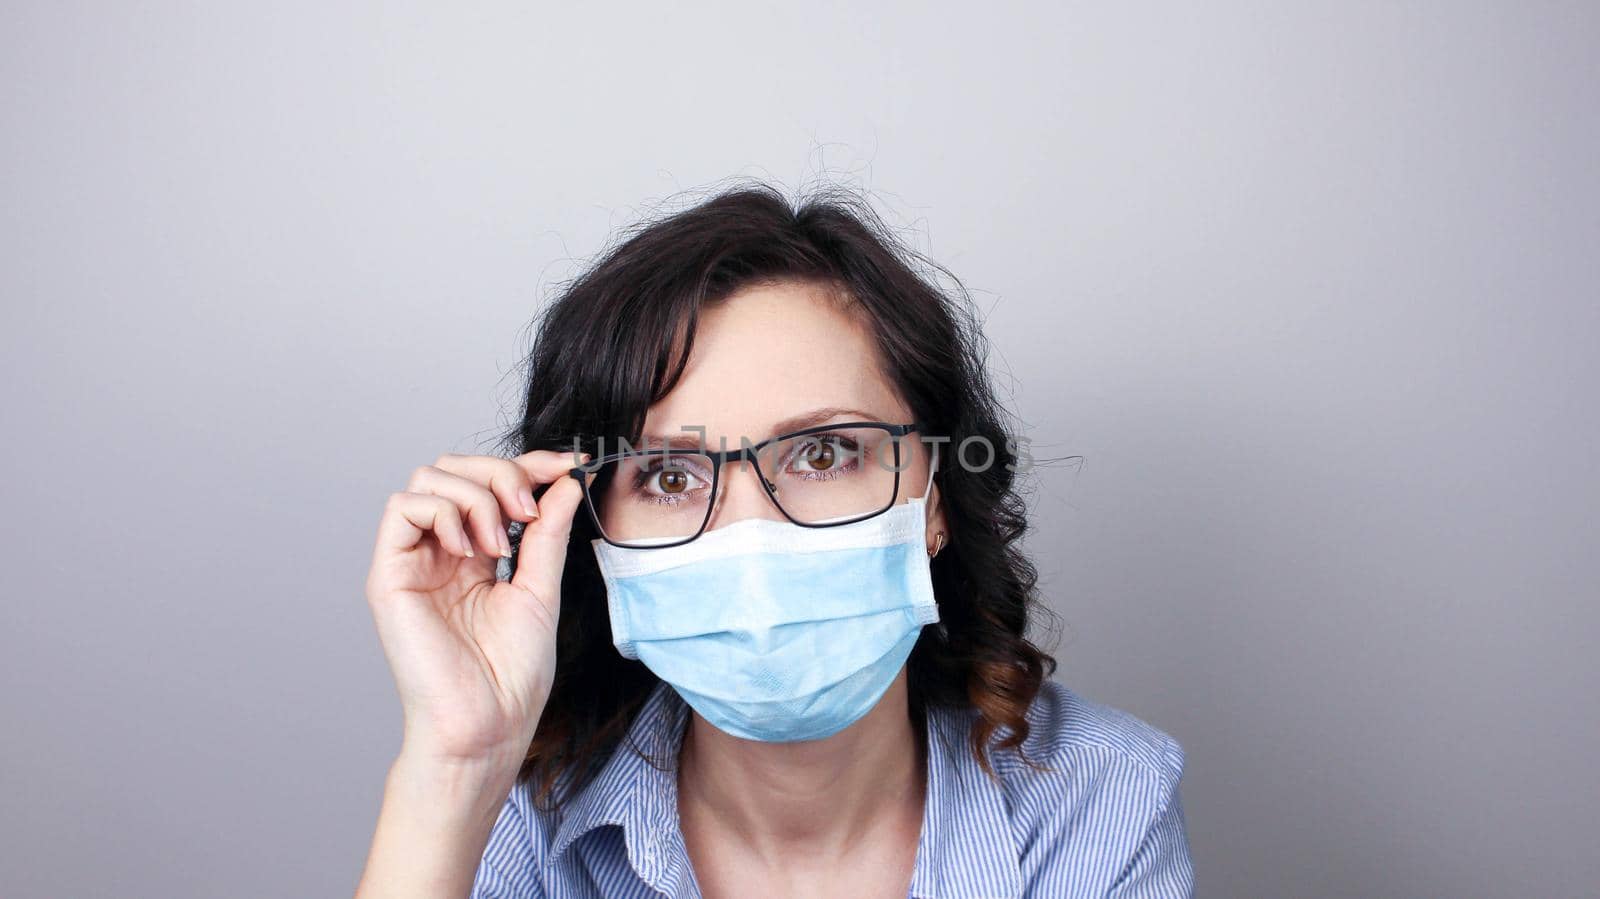 Woman wearing protection face mask against coronavirus. Woman in a mask and glasses. by JuliaDorian